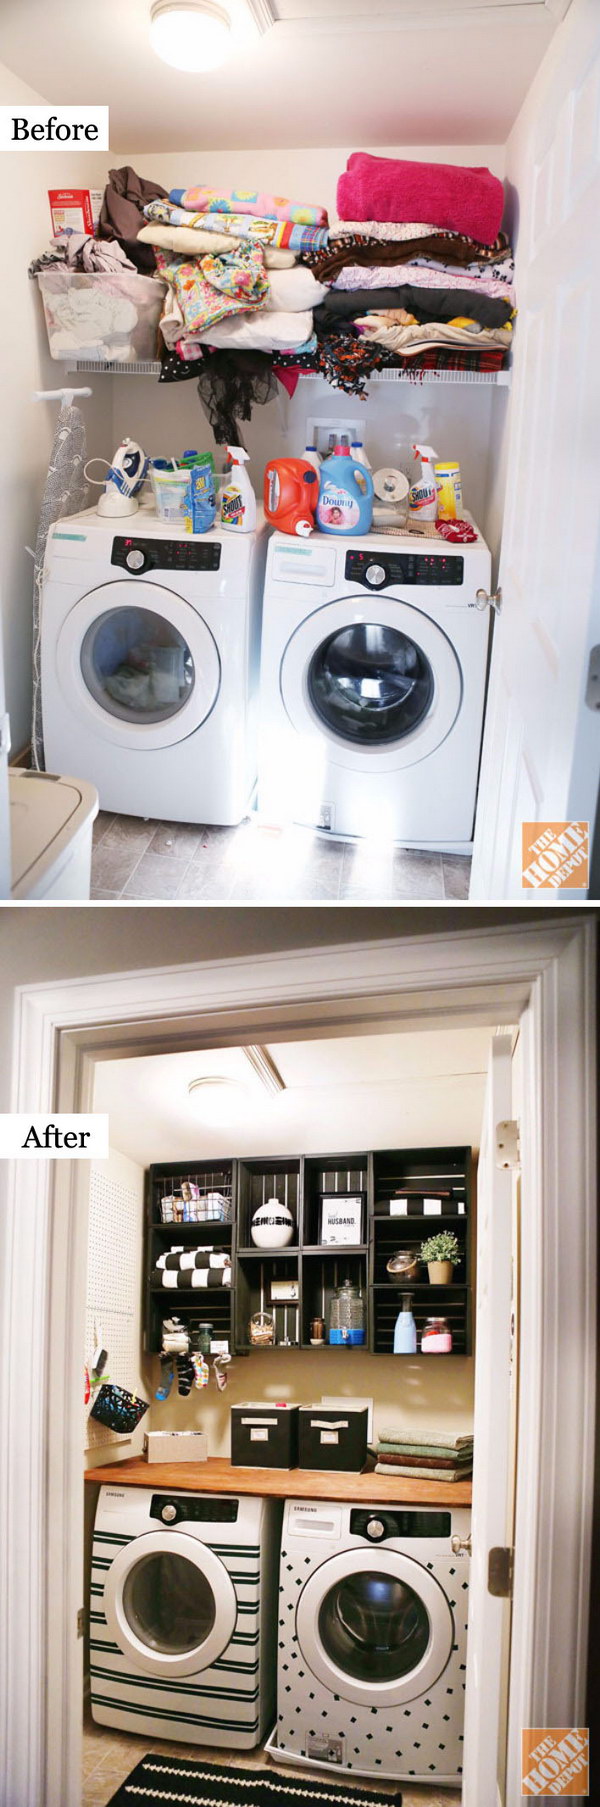 A Highly Amazing Laundry Room Renovation. 